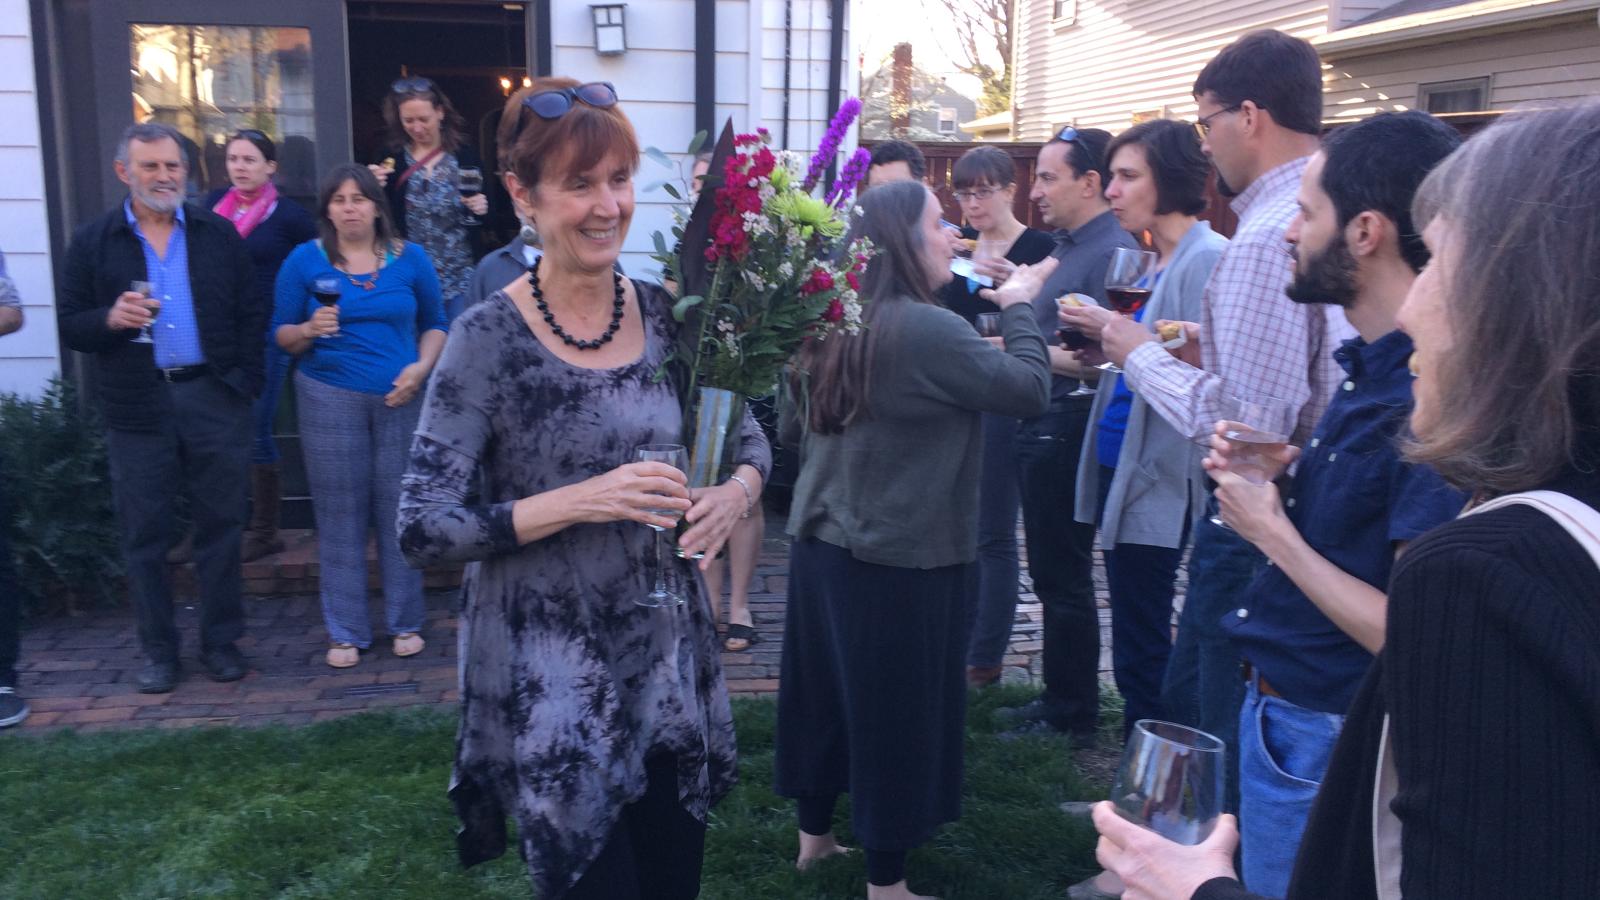 Julie with flowers at former advisor Mary Beckman's retirement party